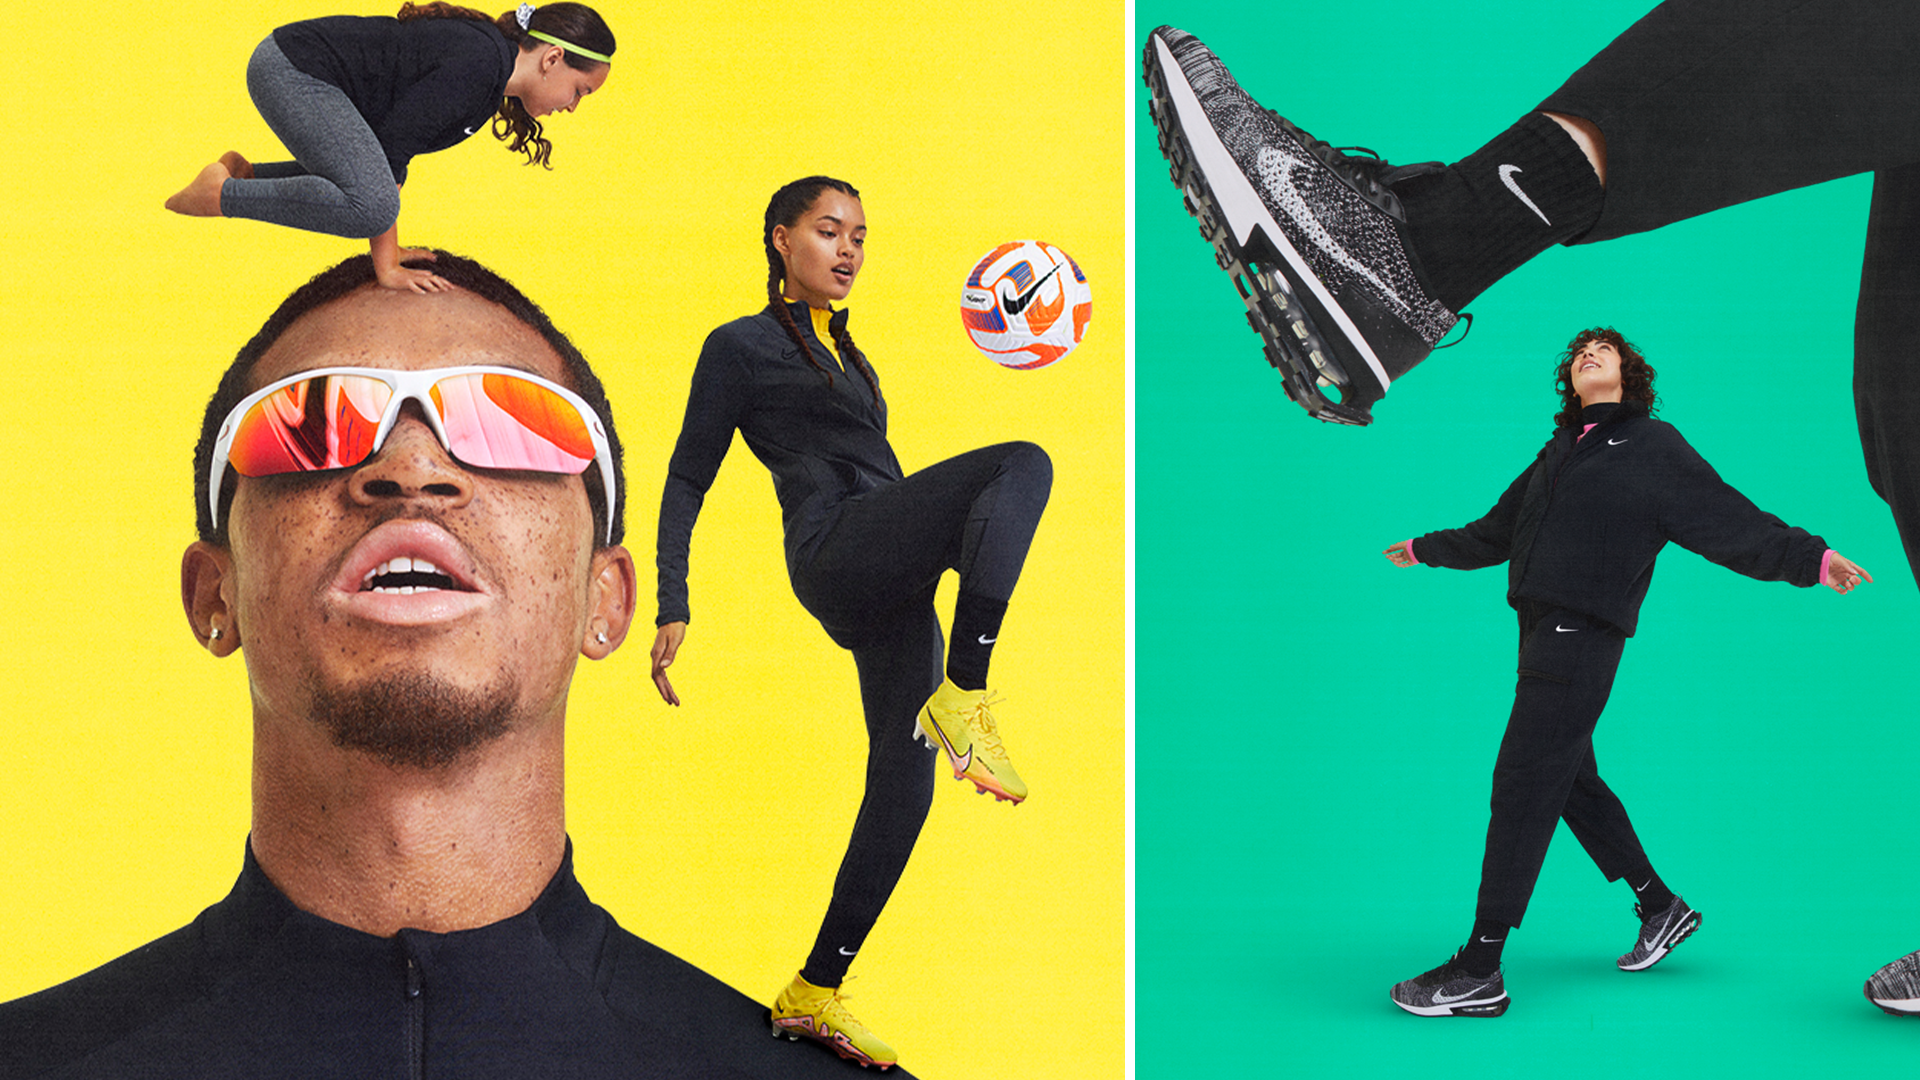 residuo Tiza Regulación The best early Black Friday 2022 Nike deals you can catch now | Goal.com UK